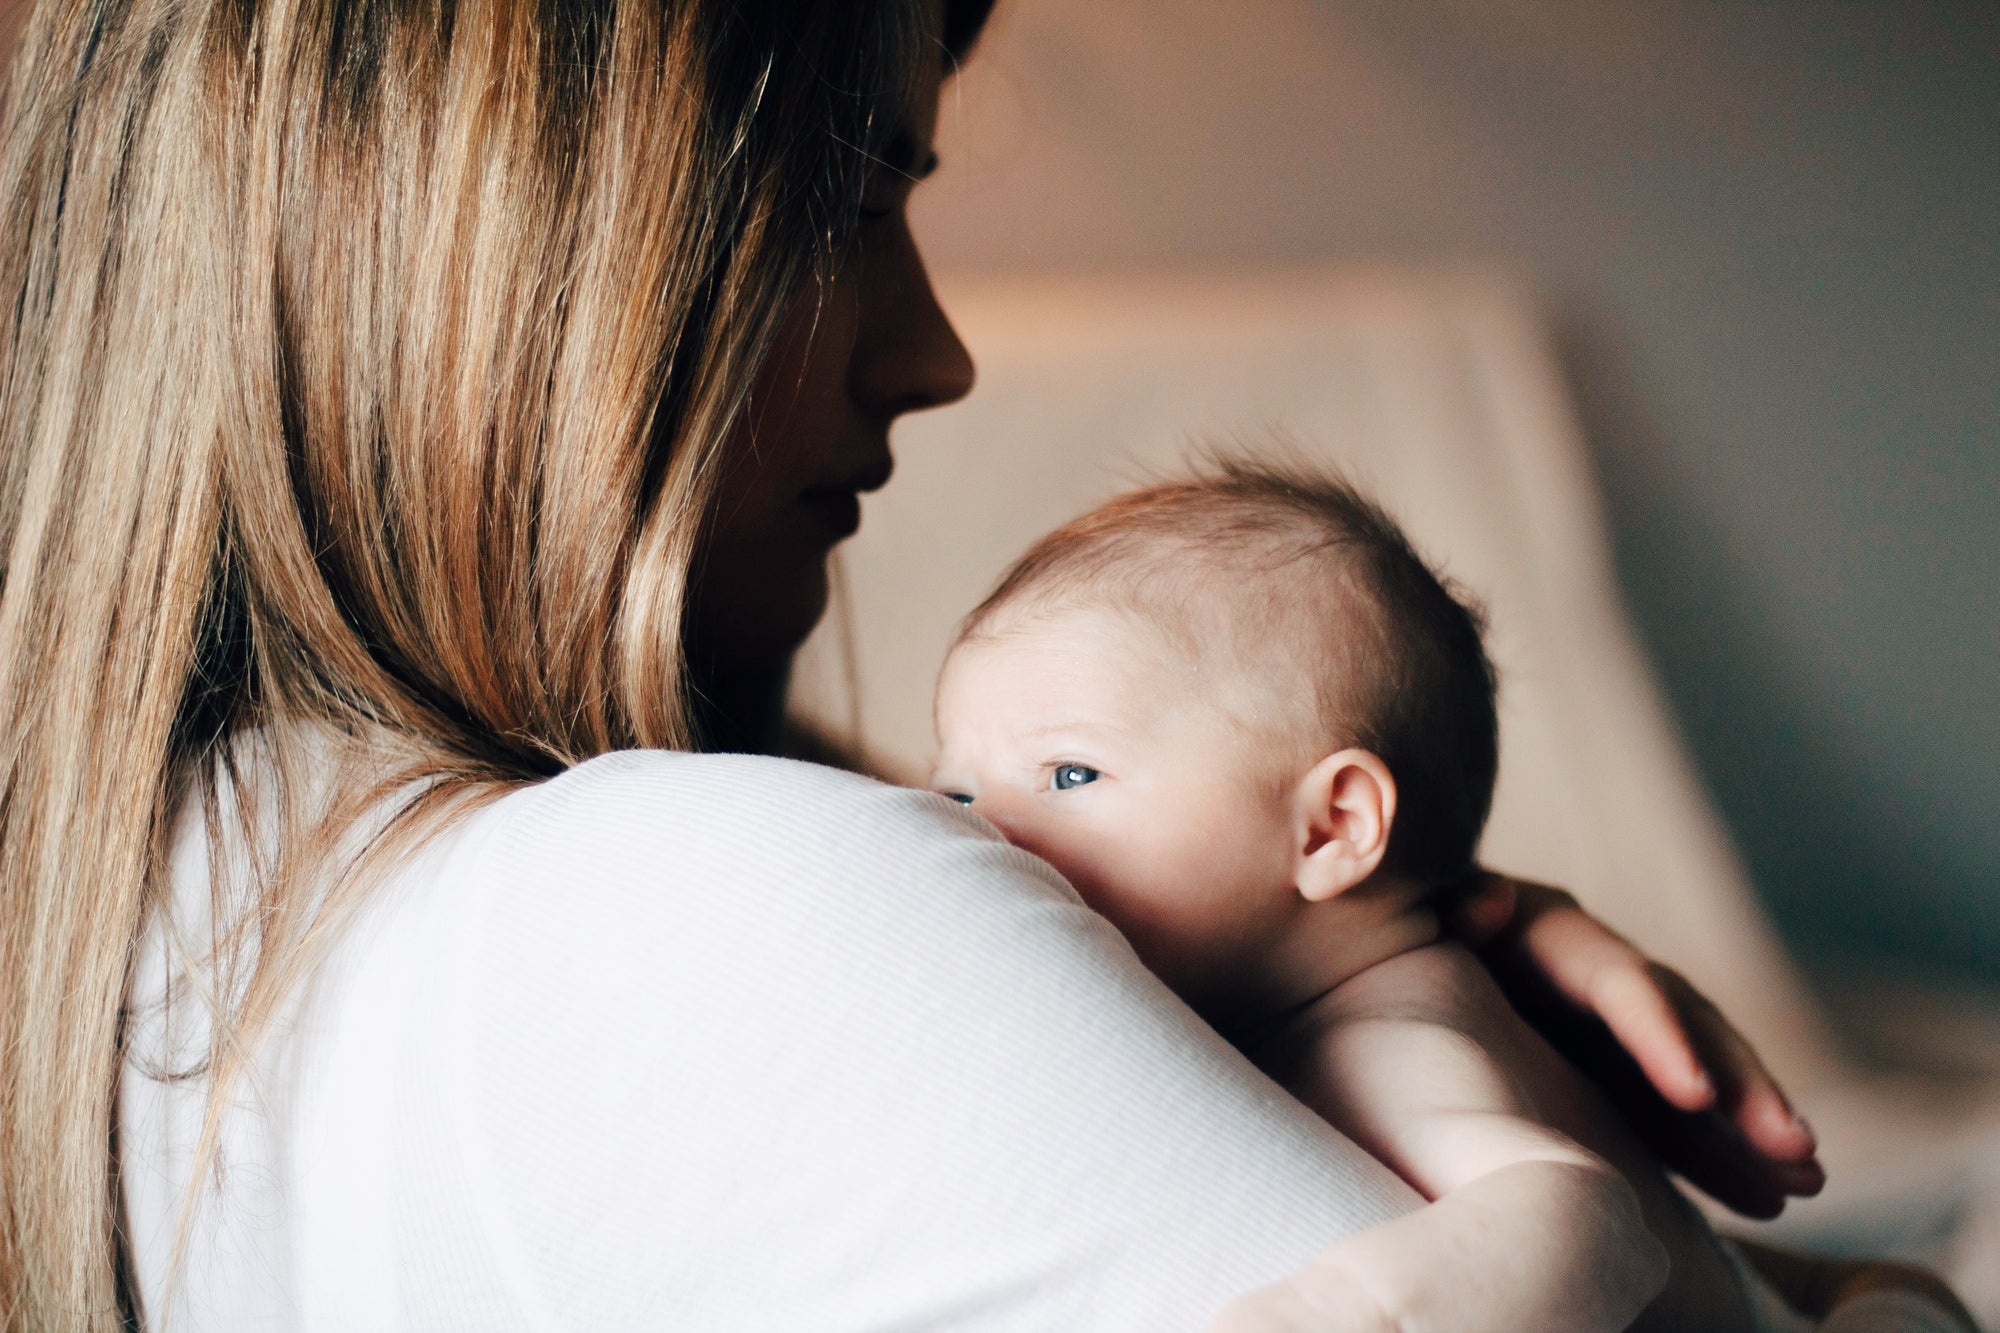 A New Mum’s Guide to Postpartum Care